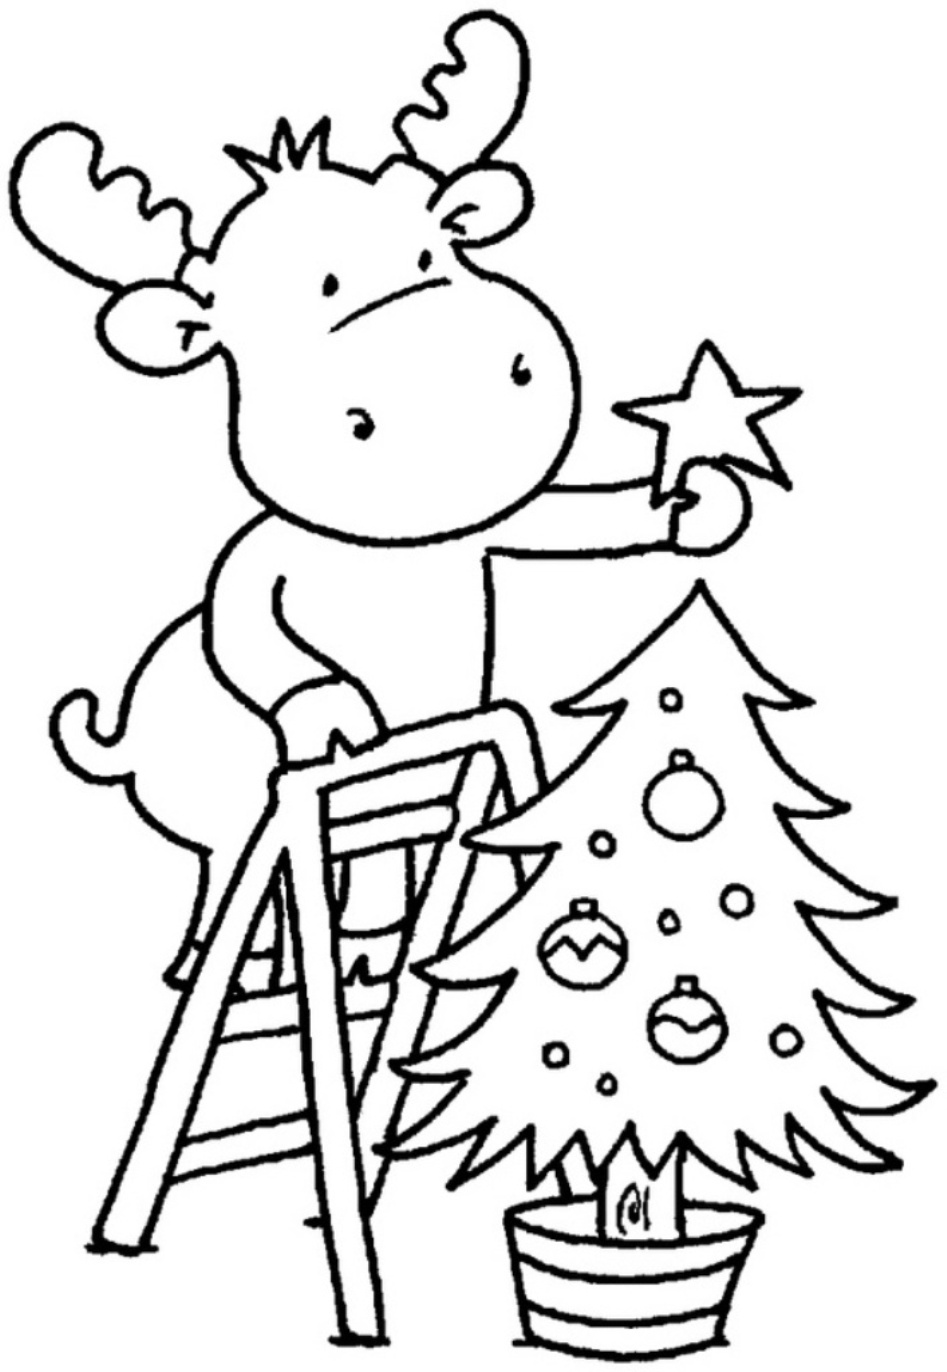 Christmas Tree For Children Coloring Page